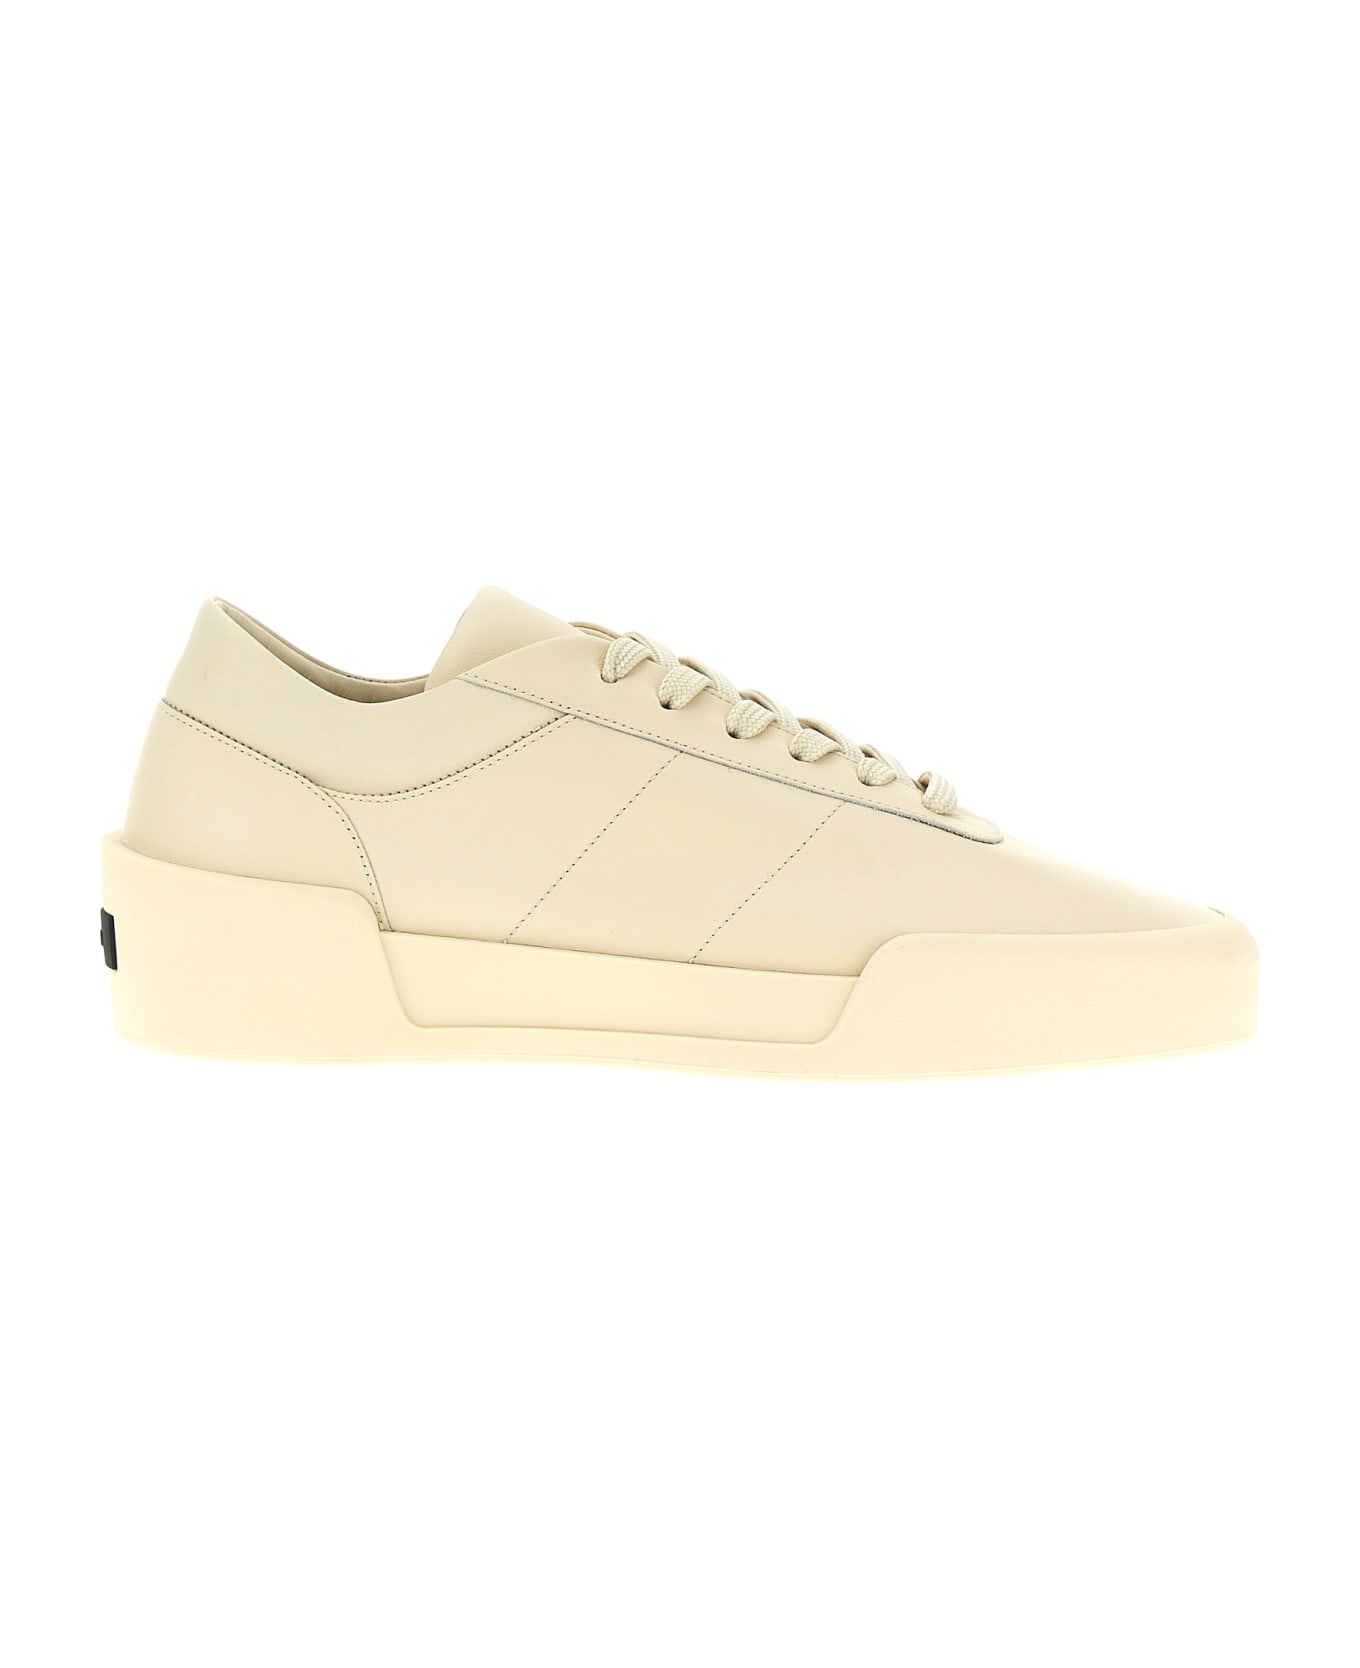 Fear of God 'aerobic Low' Sneakers - White